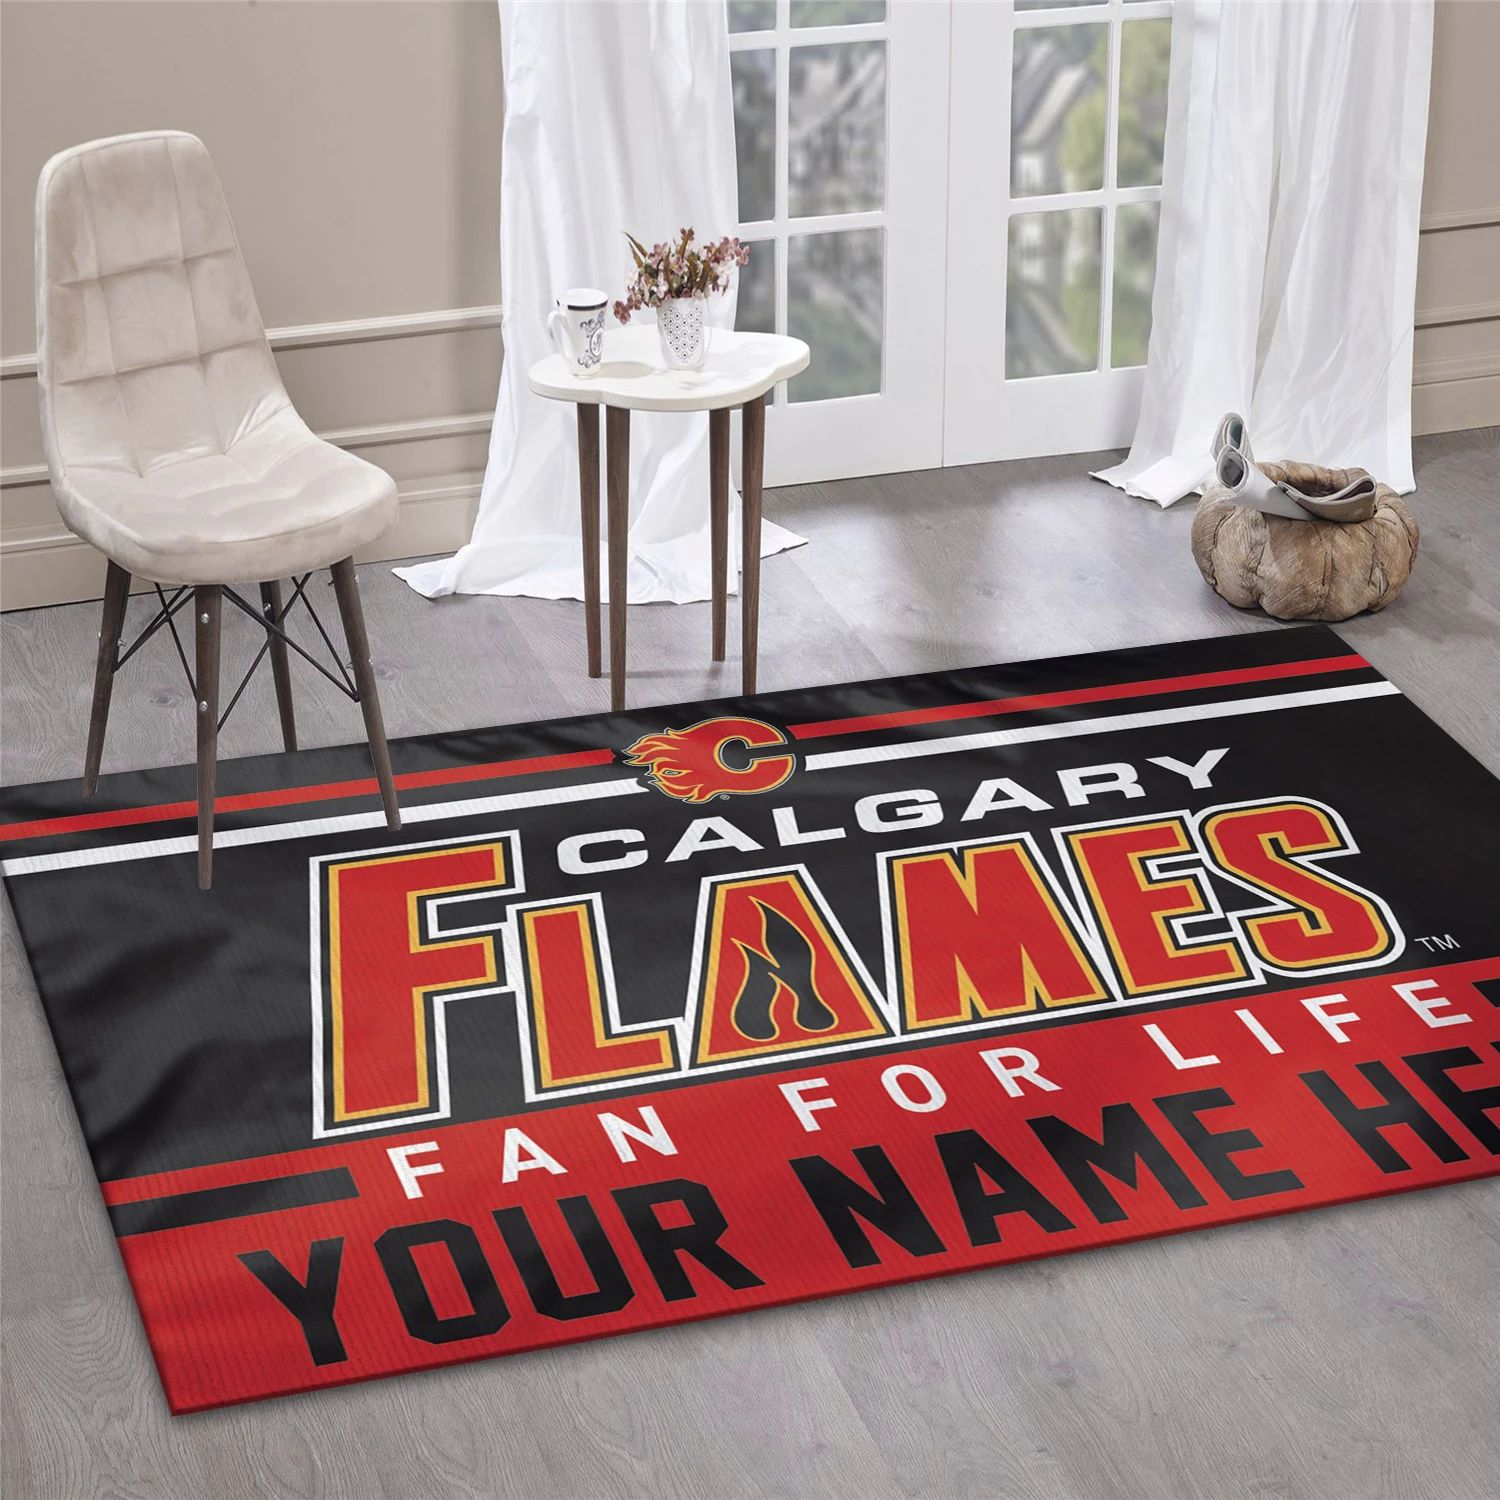 Calgary Flames Personal NHL Area Rug Carpet, Sport Living Room Rug - Home Decor - Indoor Outdoor Rugs